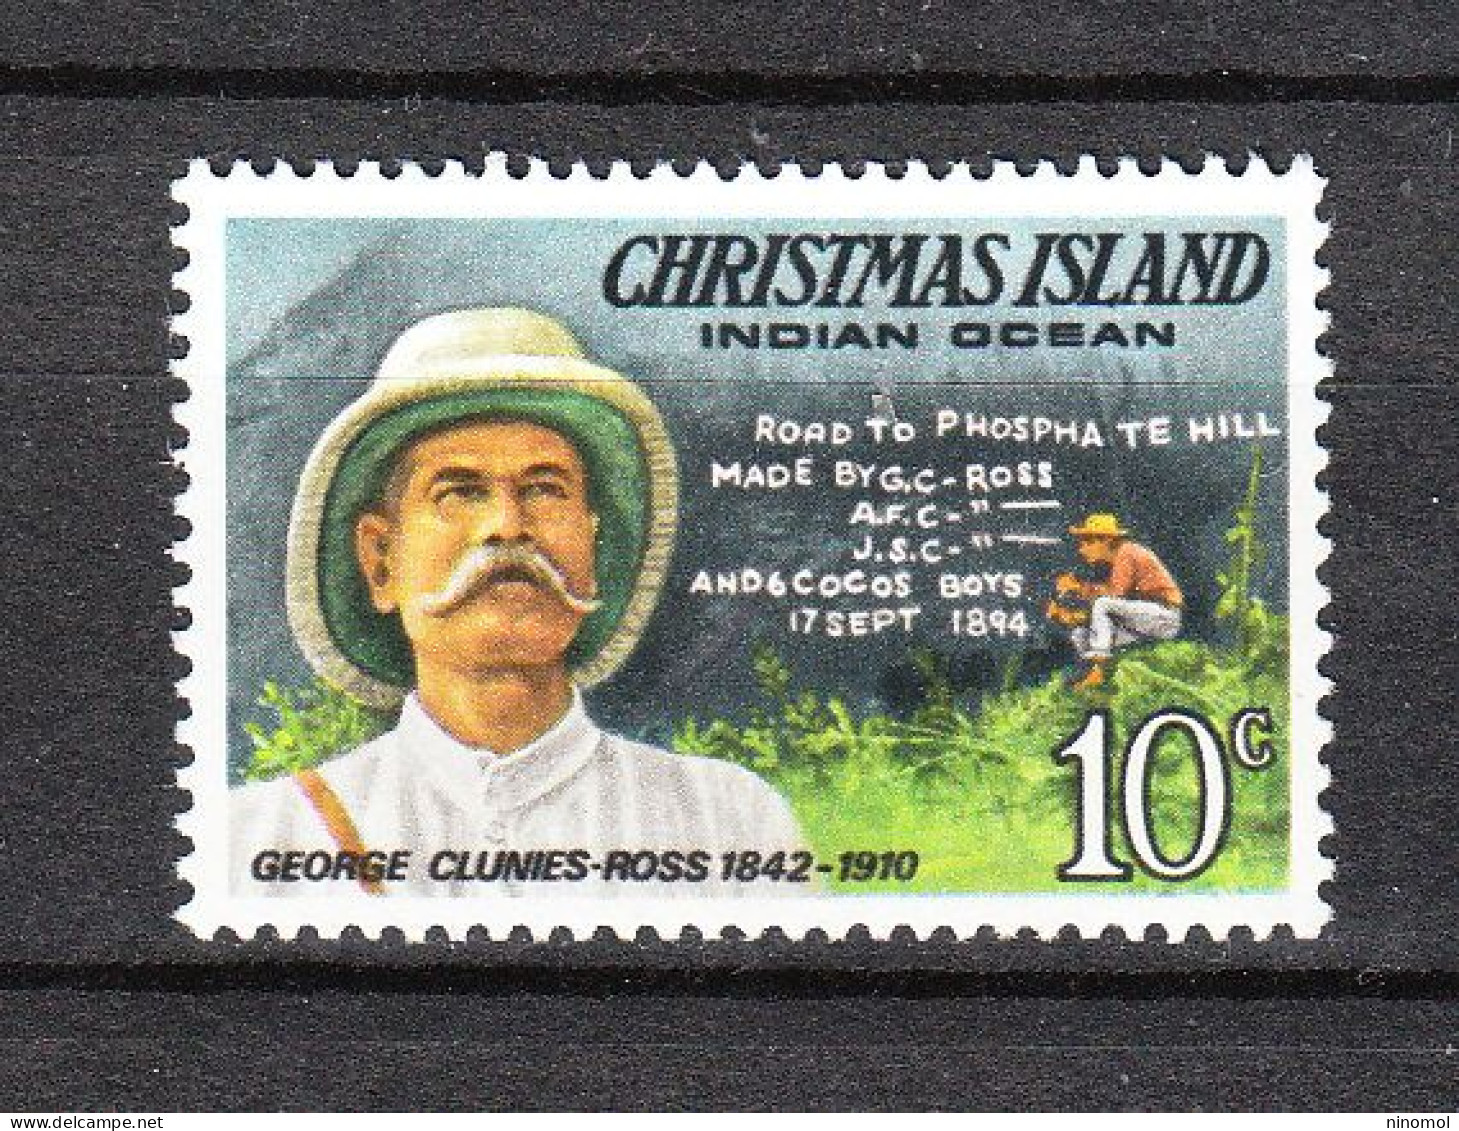 Christmas Islands  - 1978. George Clinies-Ross, Re Feudale Britannico Delle Cocos. British Feudal King Of The Cocos. MNH - Case Reali